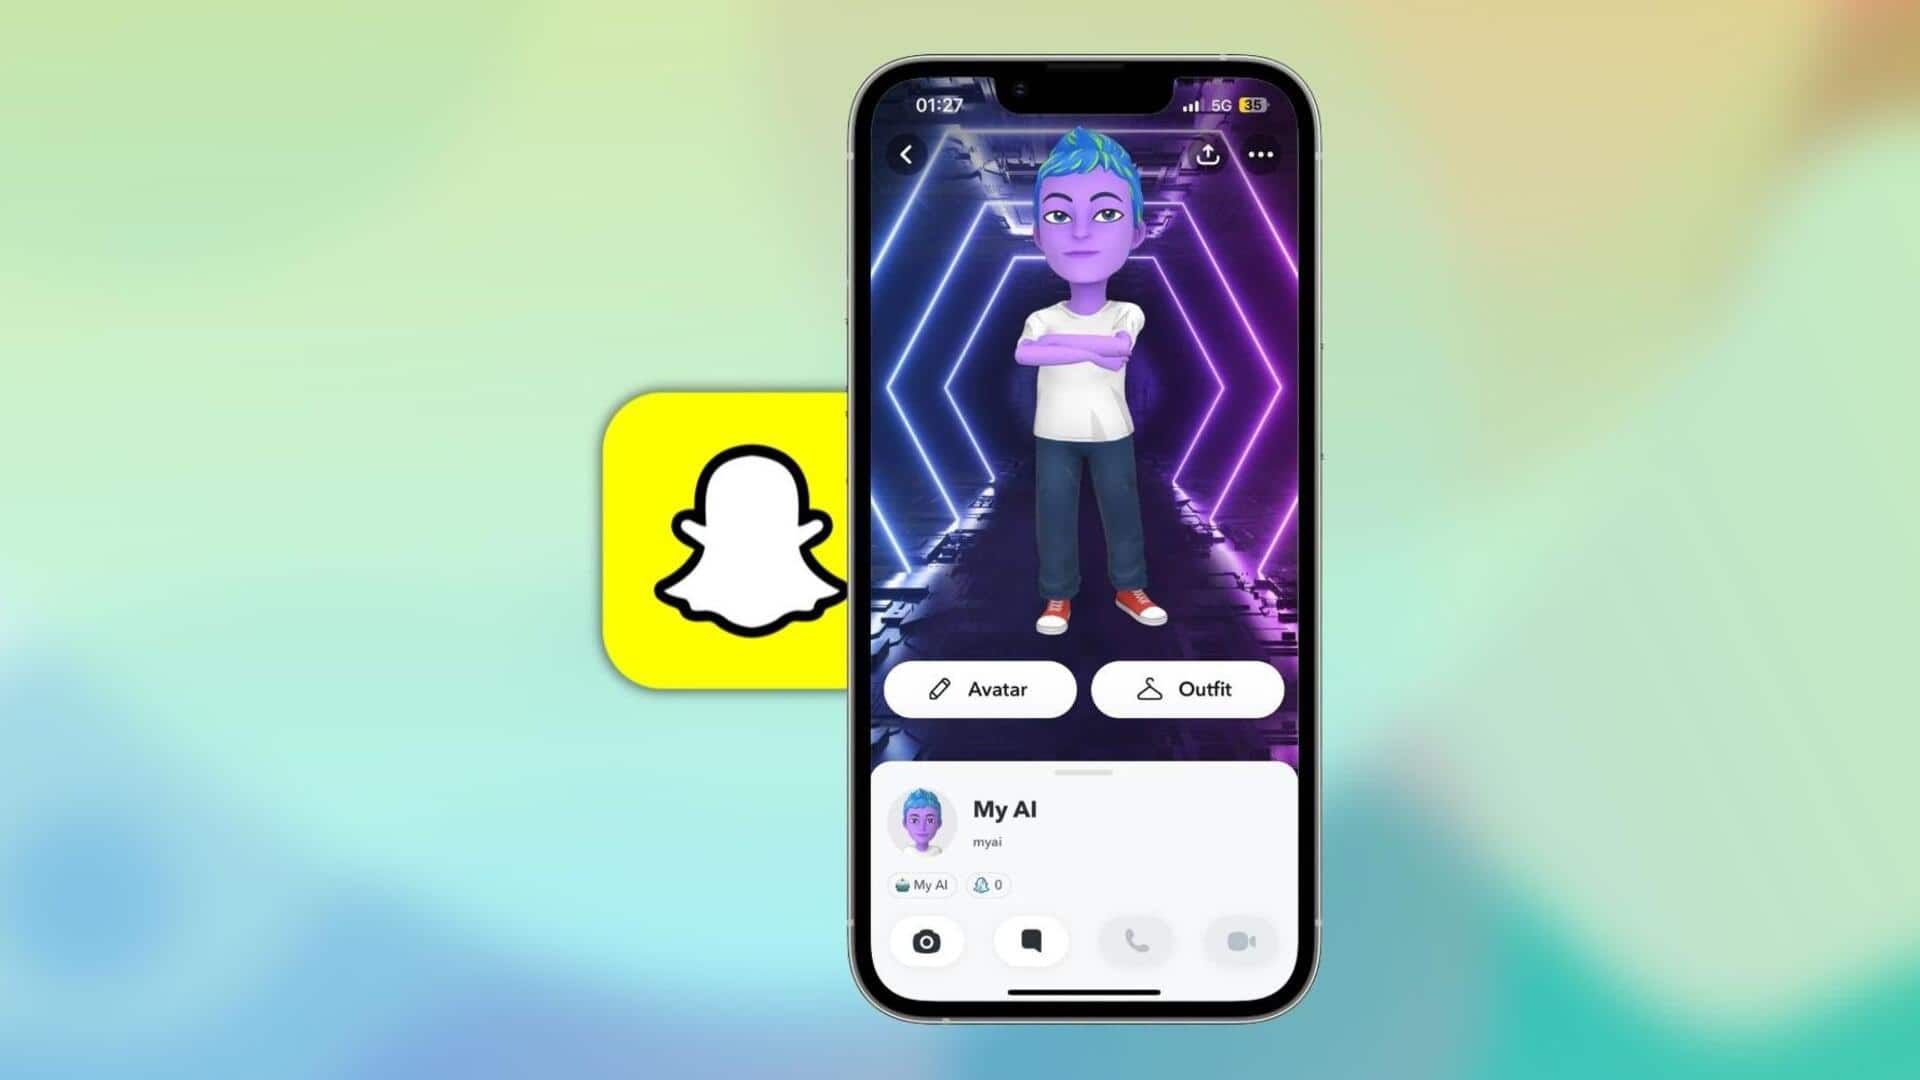 Snapchat's AI chatbot faces scrutiny in UK over privacy concerns